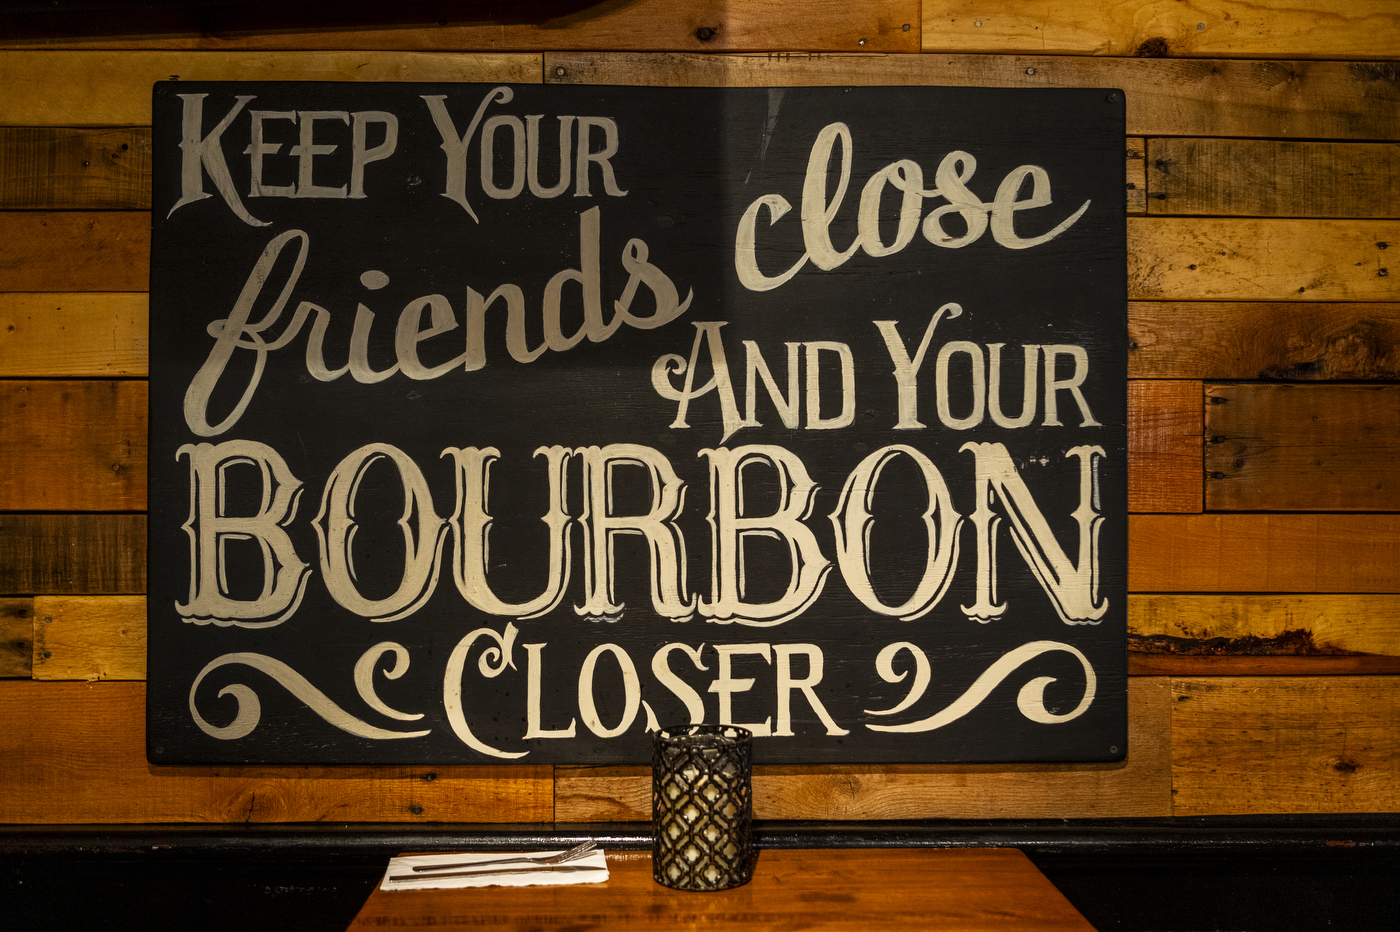 sign that says "keep your friends close and your bourbon closer"